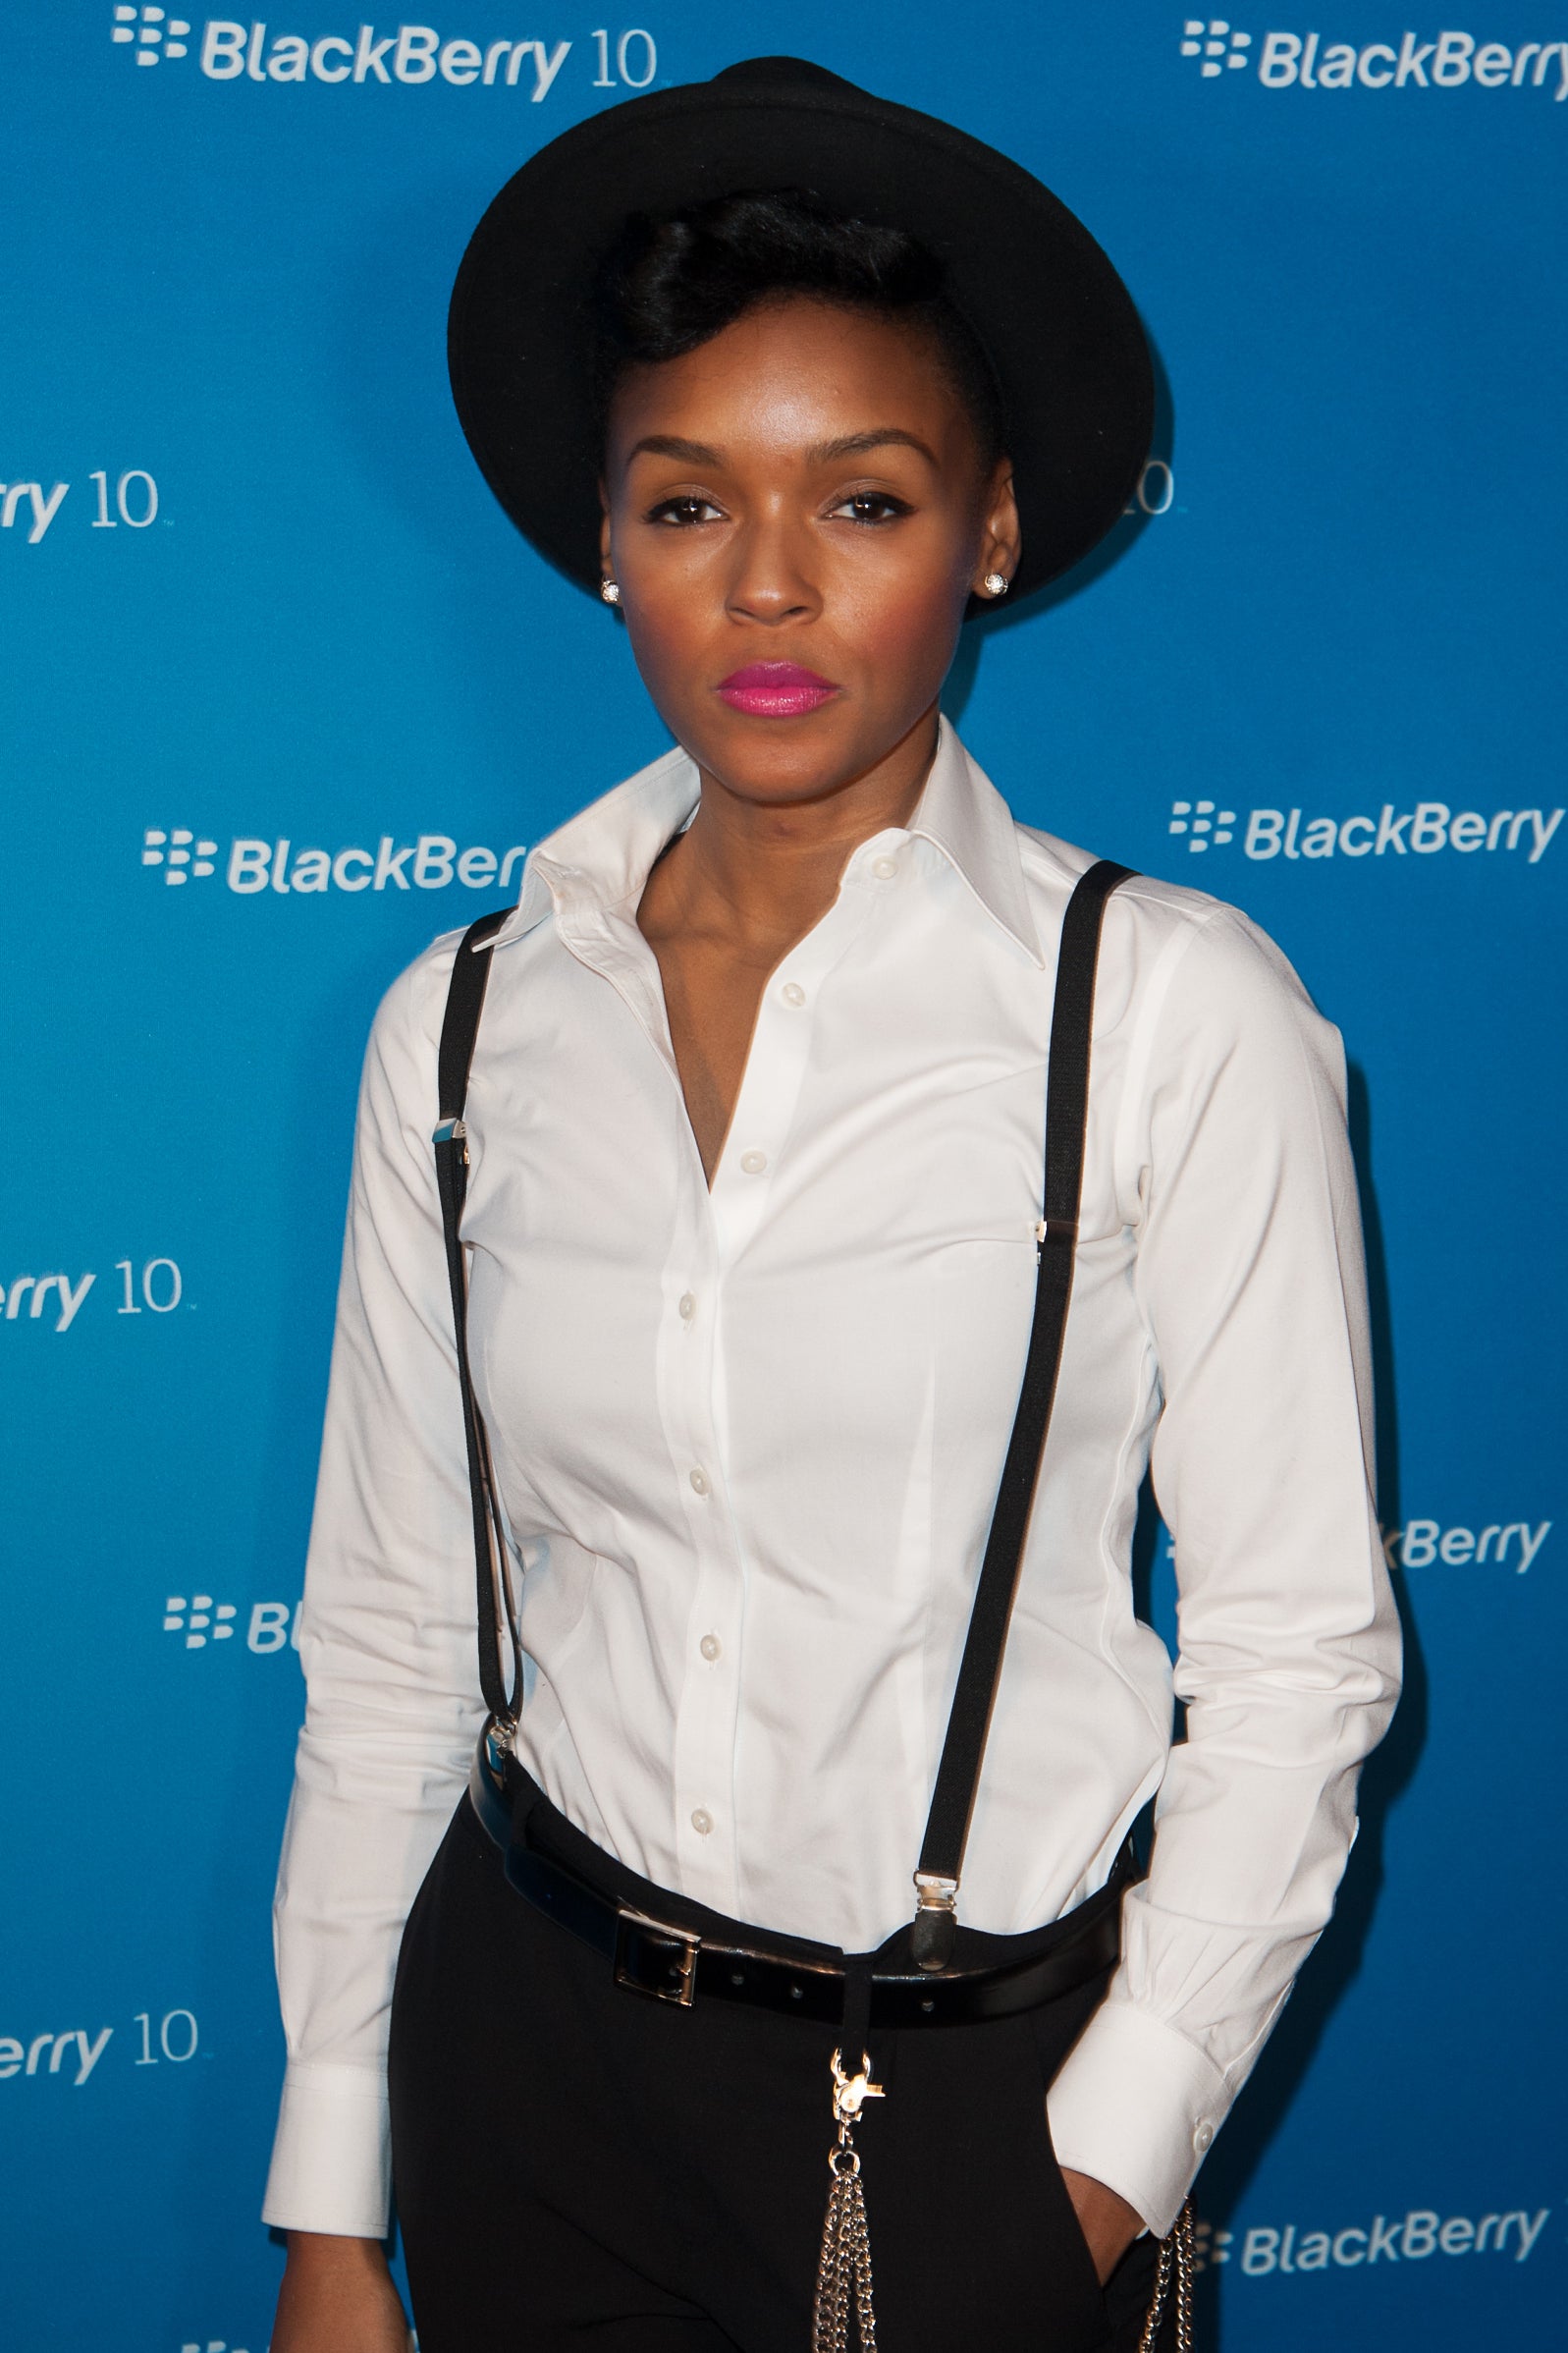 Janelle Monáe and suspenders, a love story in photos.